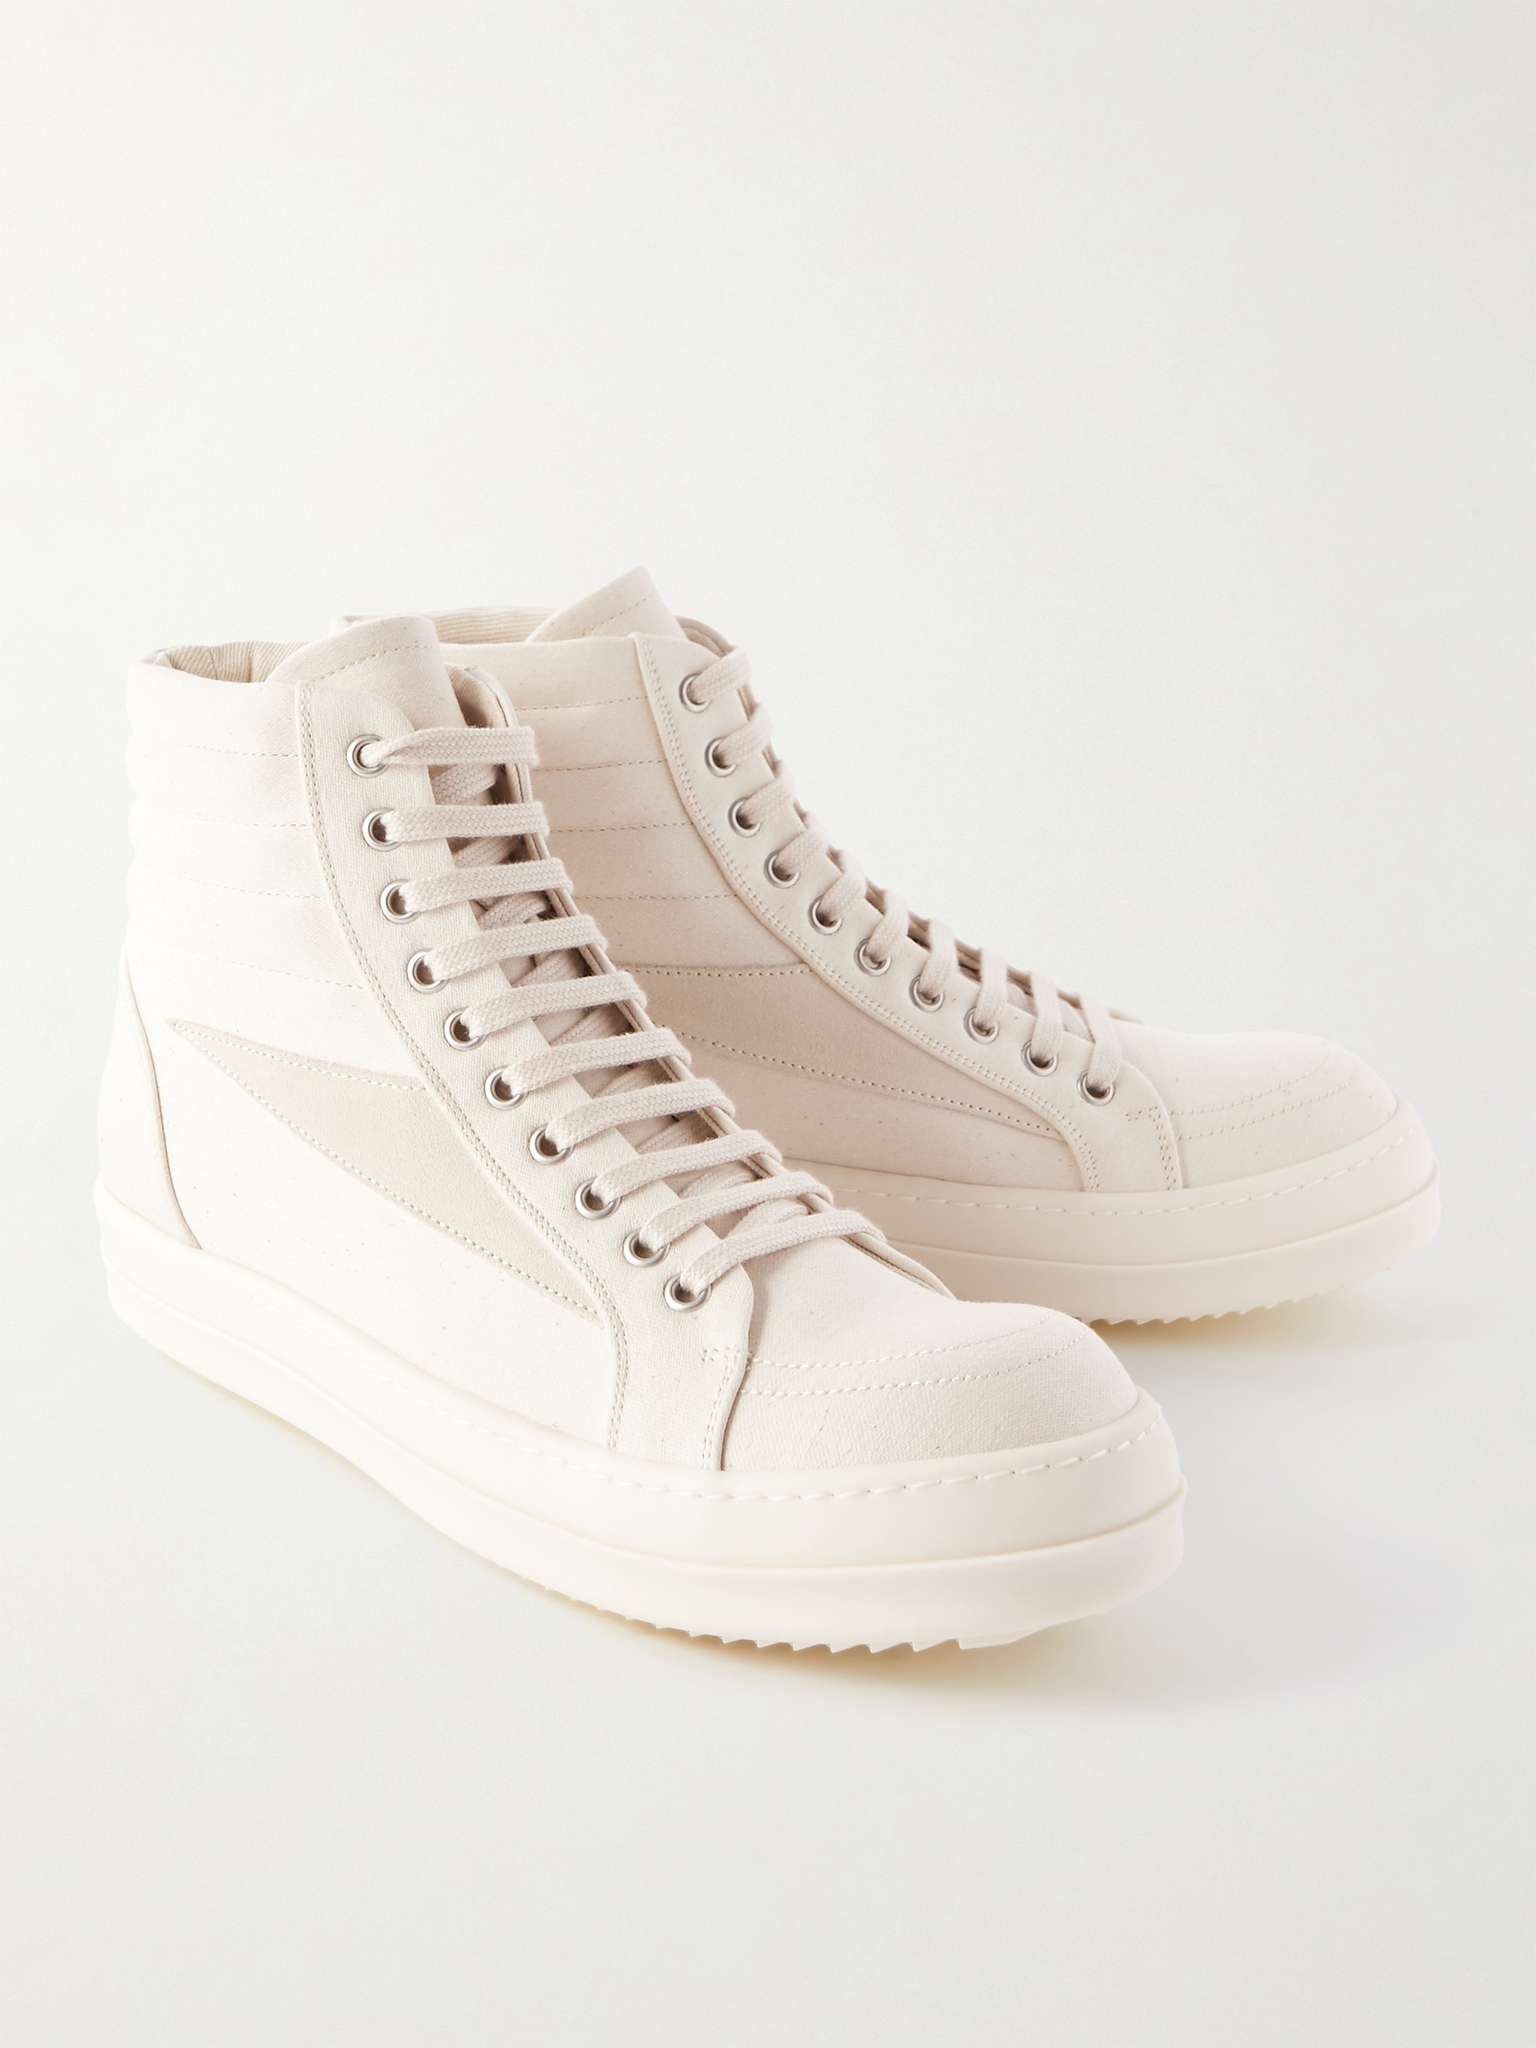 Vintage Suede-Trimmed Canvas High-Top Sneakers - 4